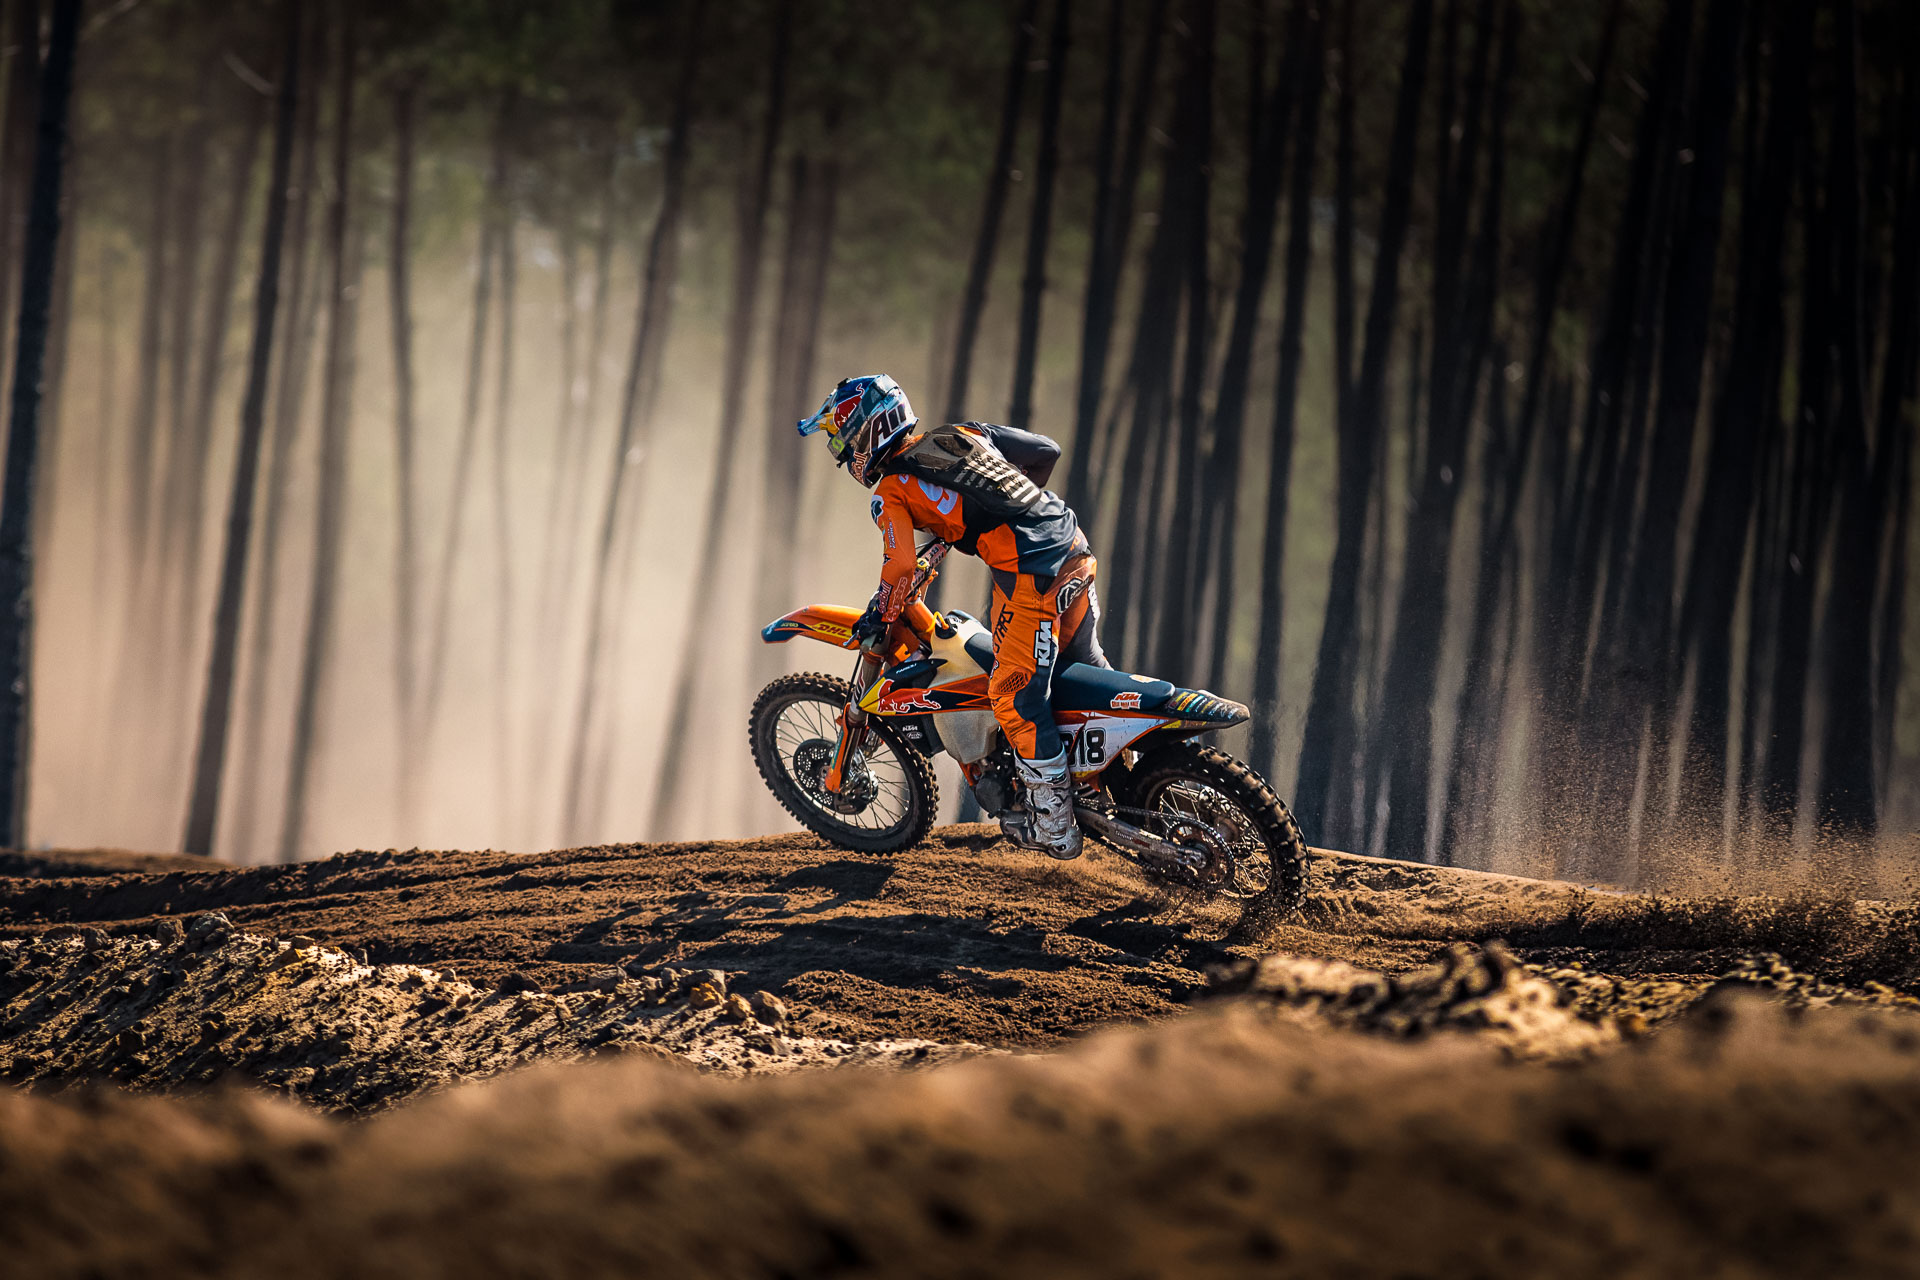 Camille Chapelière (France) | Red Bull athlete racing through a forest by Ondrej kolacek